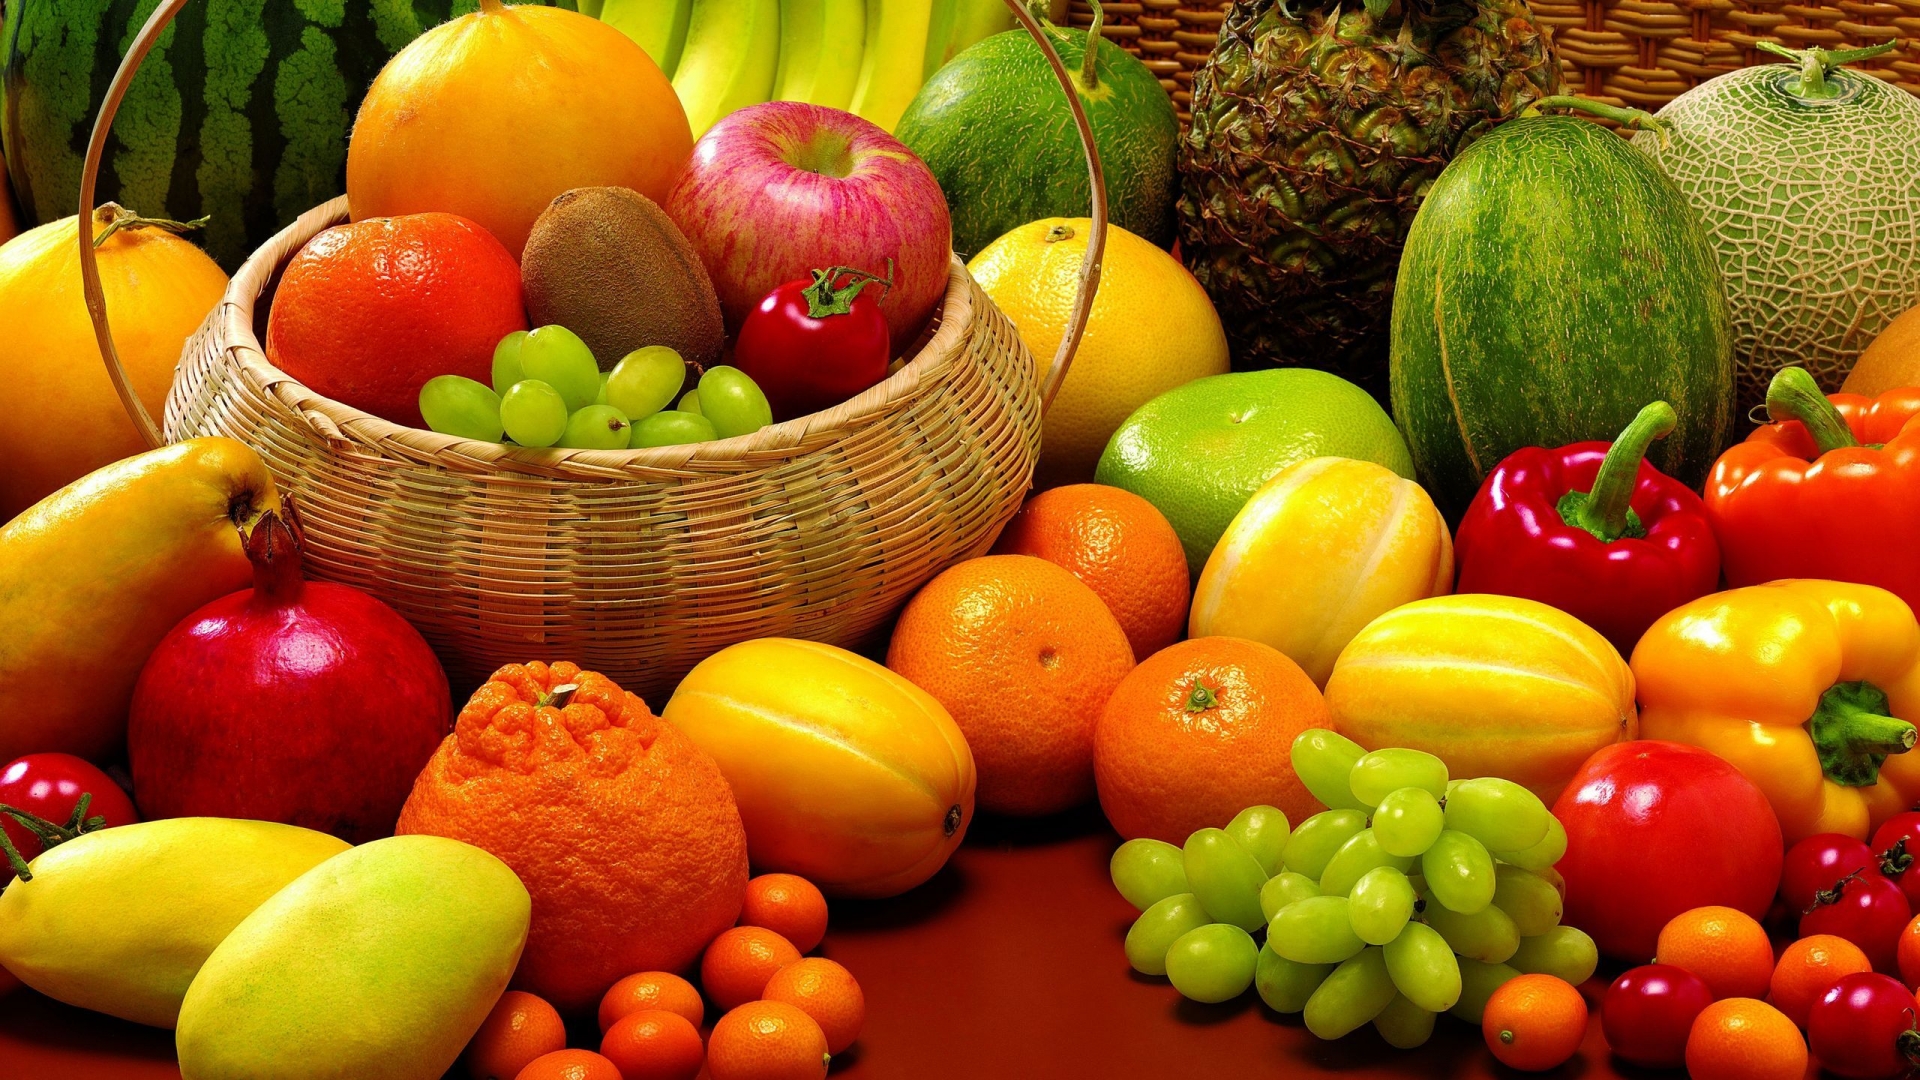 Fruits and Veggies for 1920 x 1080 HDTV 1080p resolution